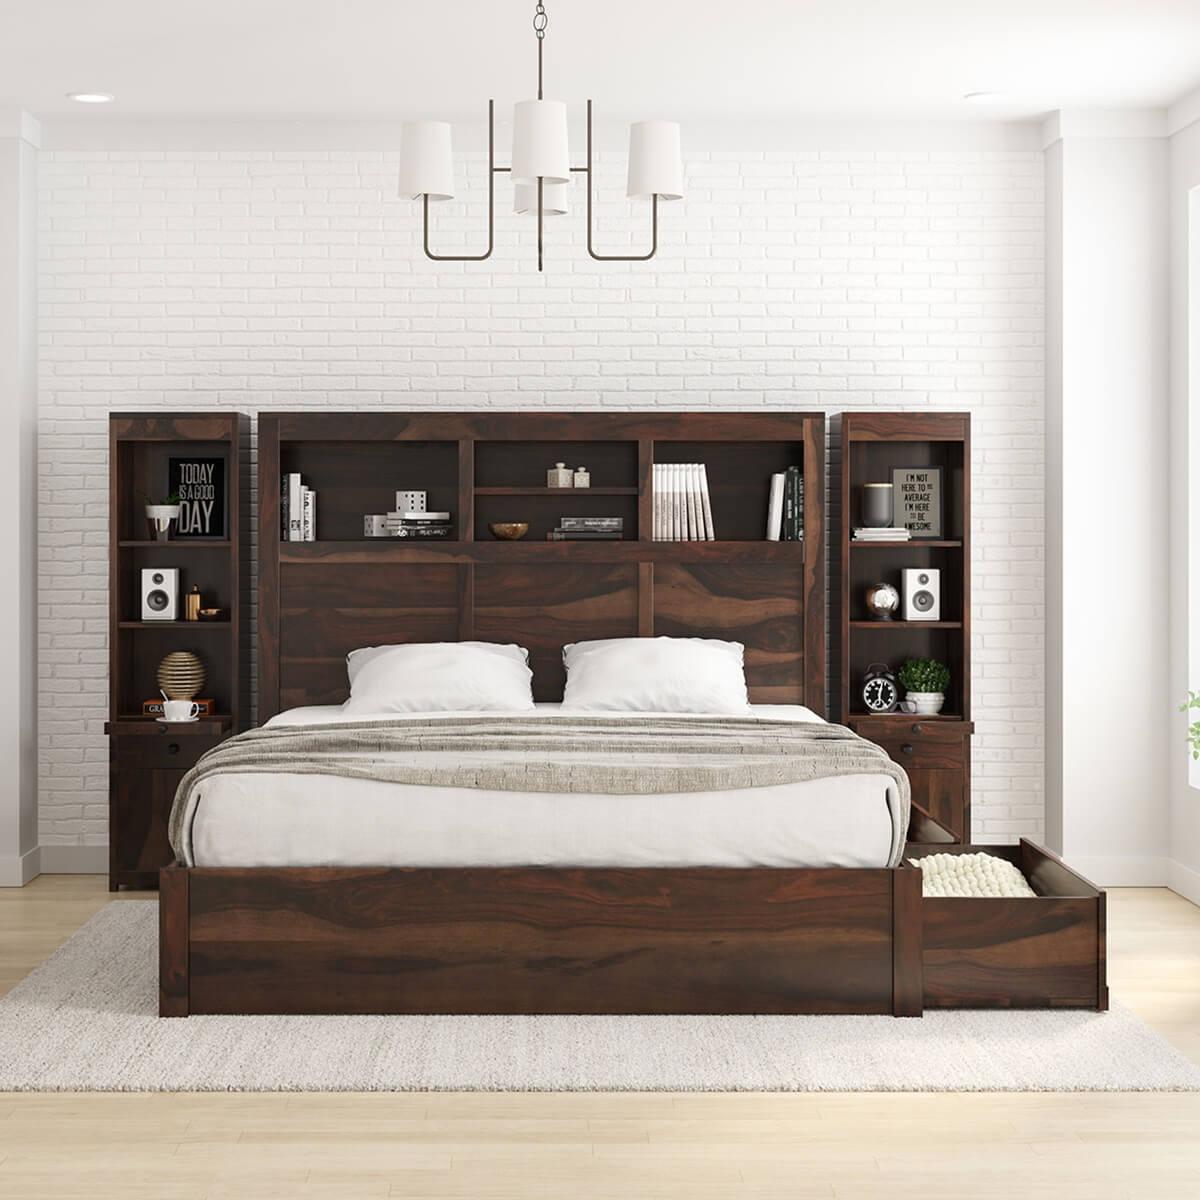 How To Attach A Headboard Any Bed, Can You Attach A Headboard To Any Frame